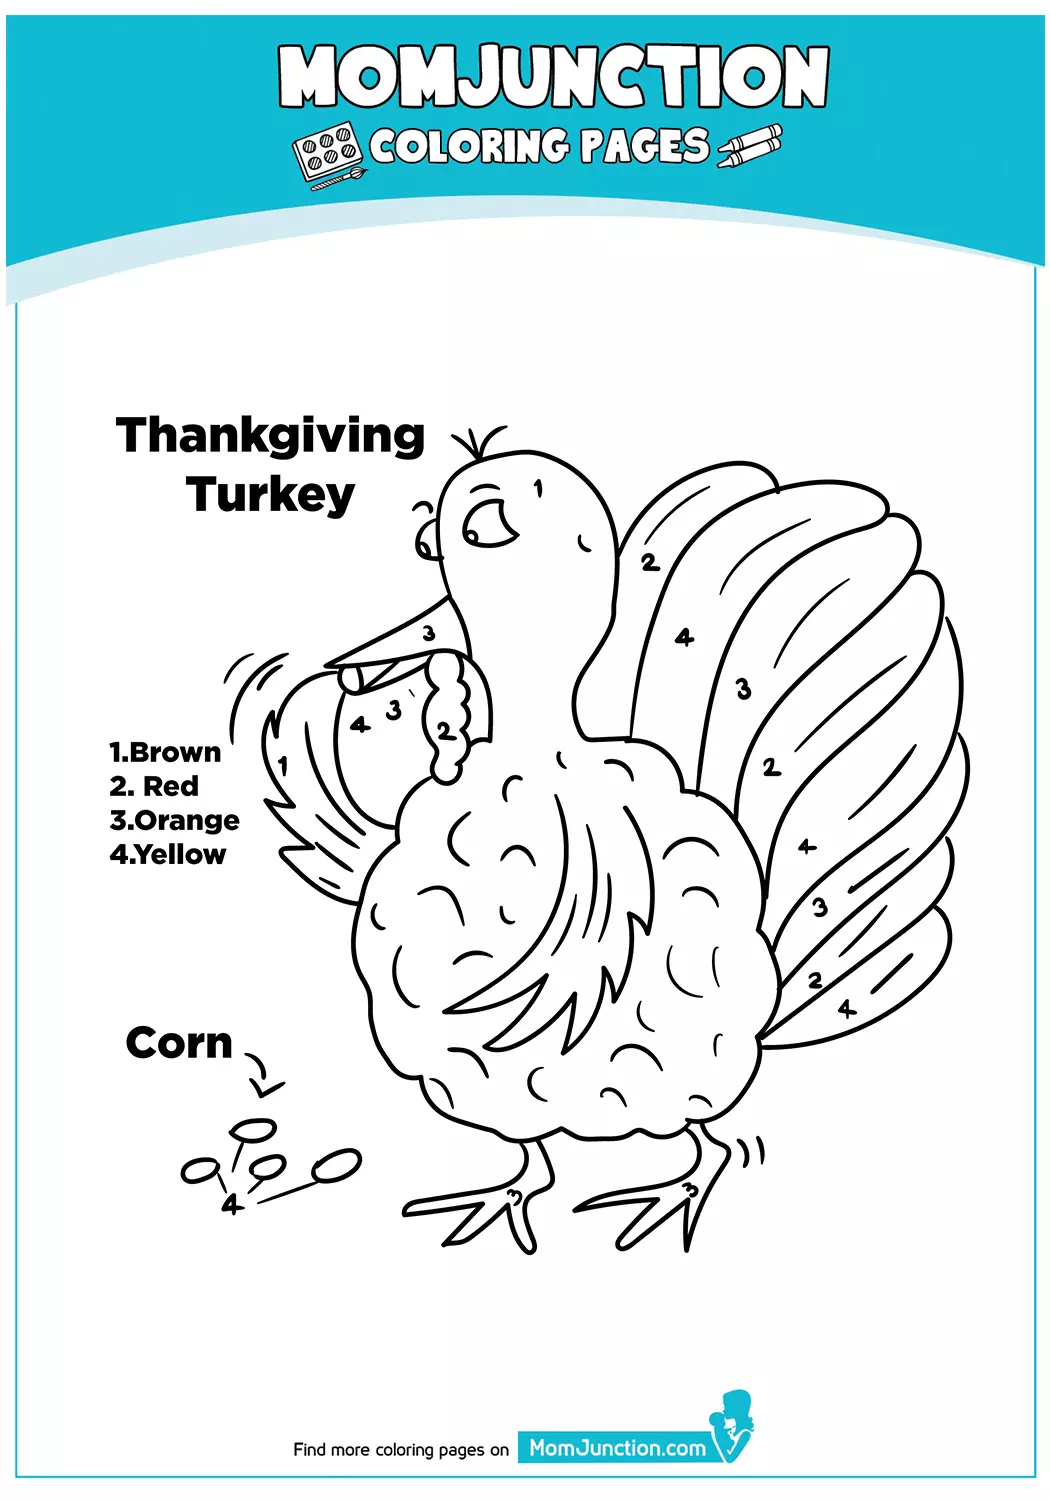 The-Turkey-With-Coloring-Instructions-17